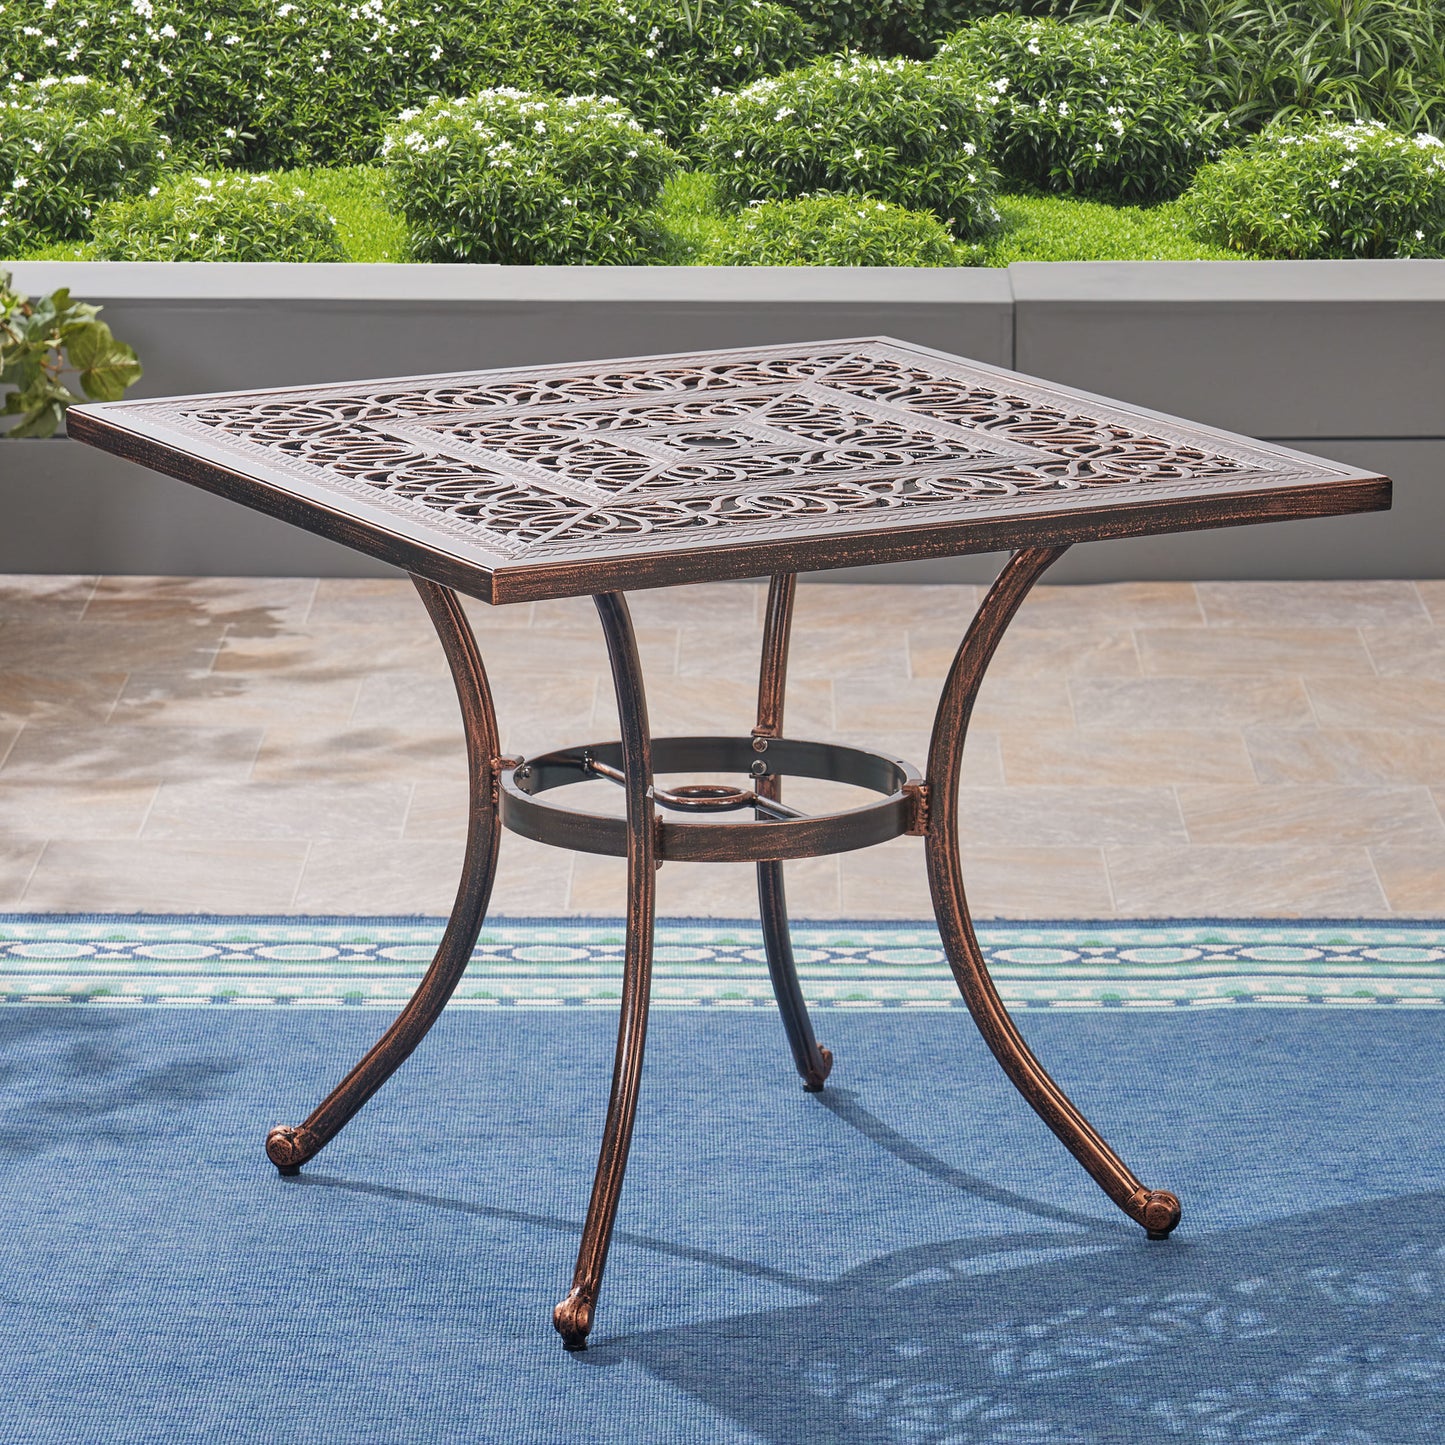 Barbara Outdoor 4-Seater Cast Aluminum Square-Table Dining Set, Shiny Copper